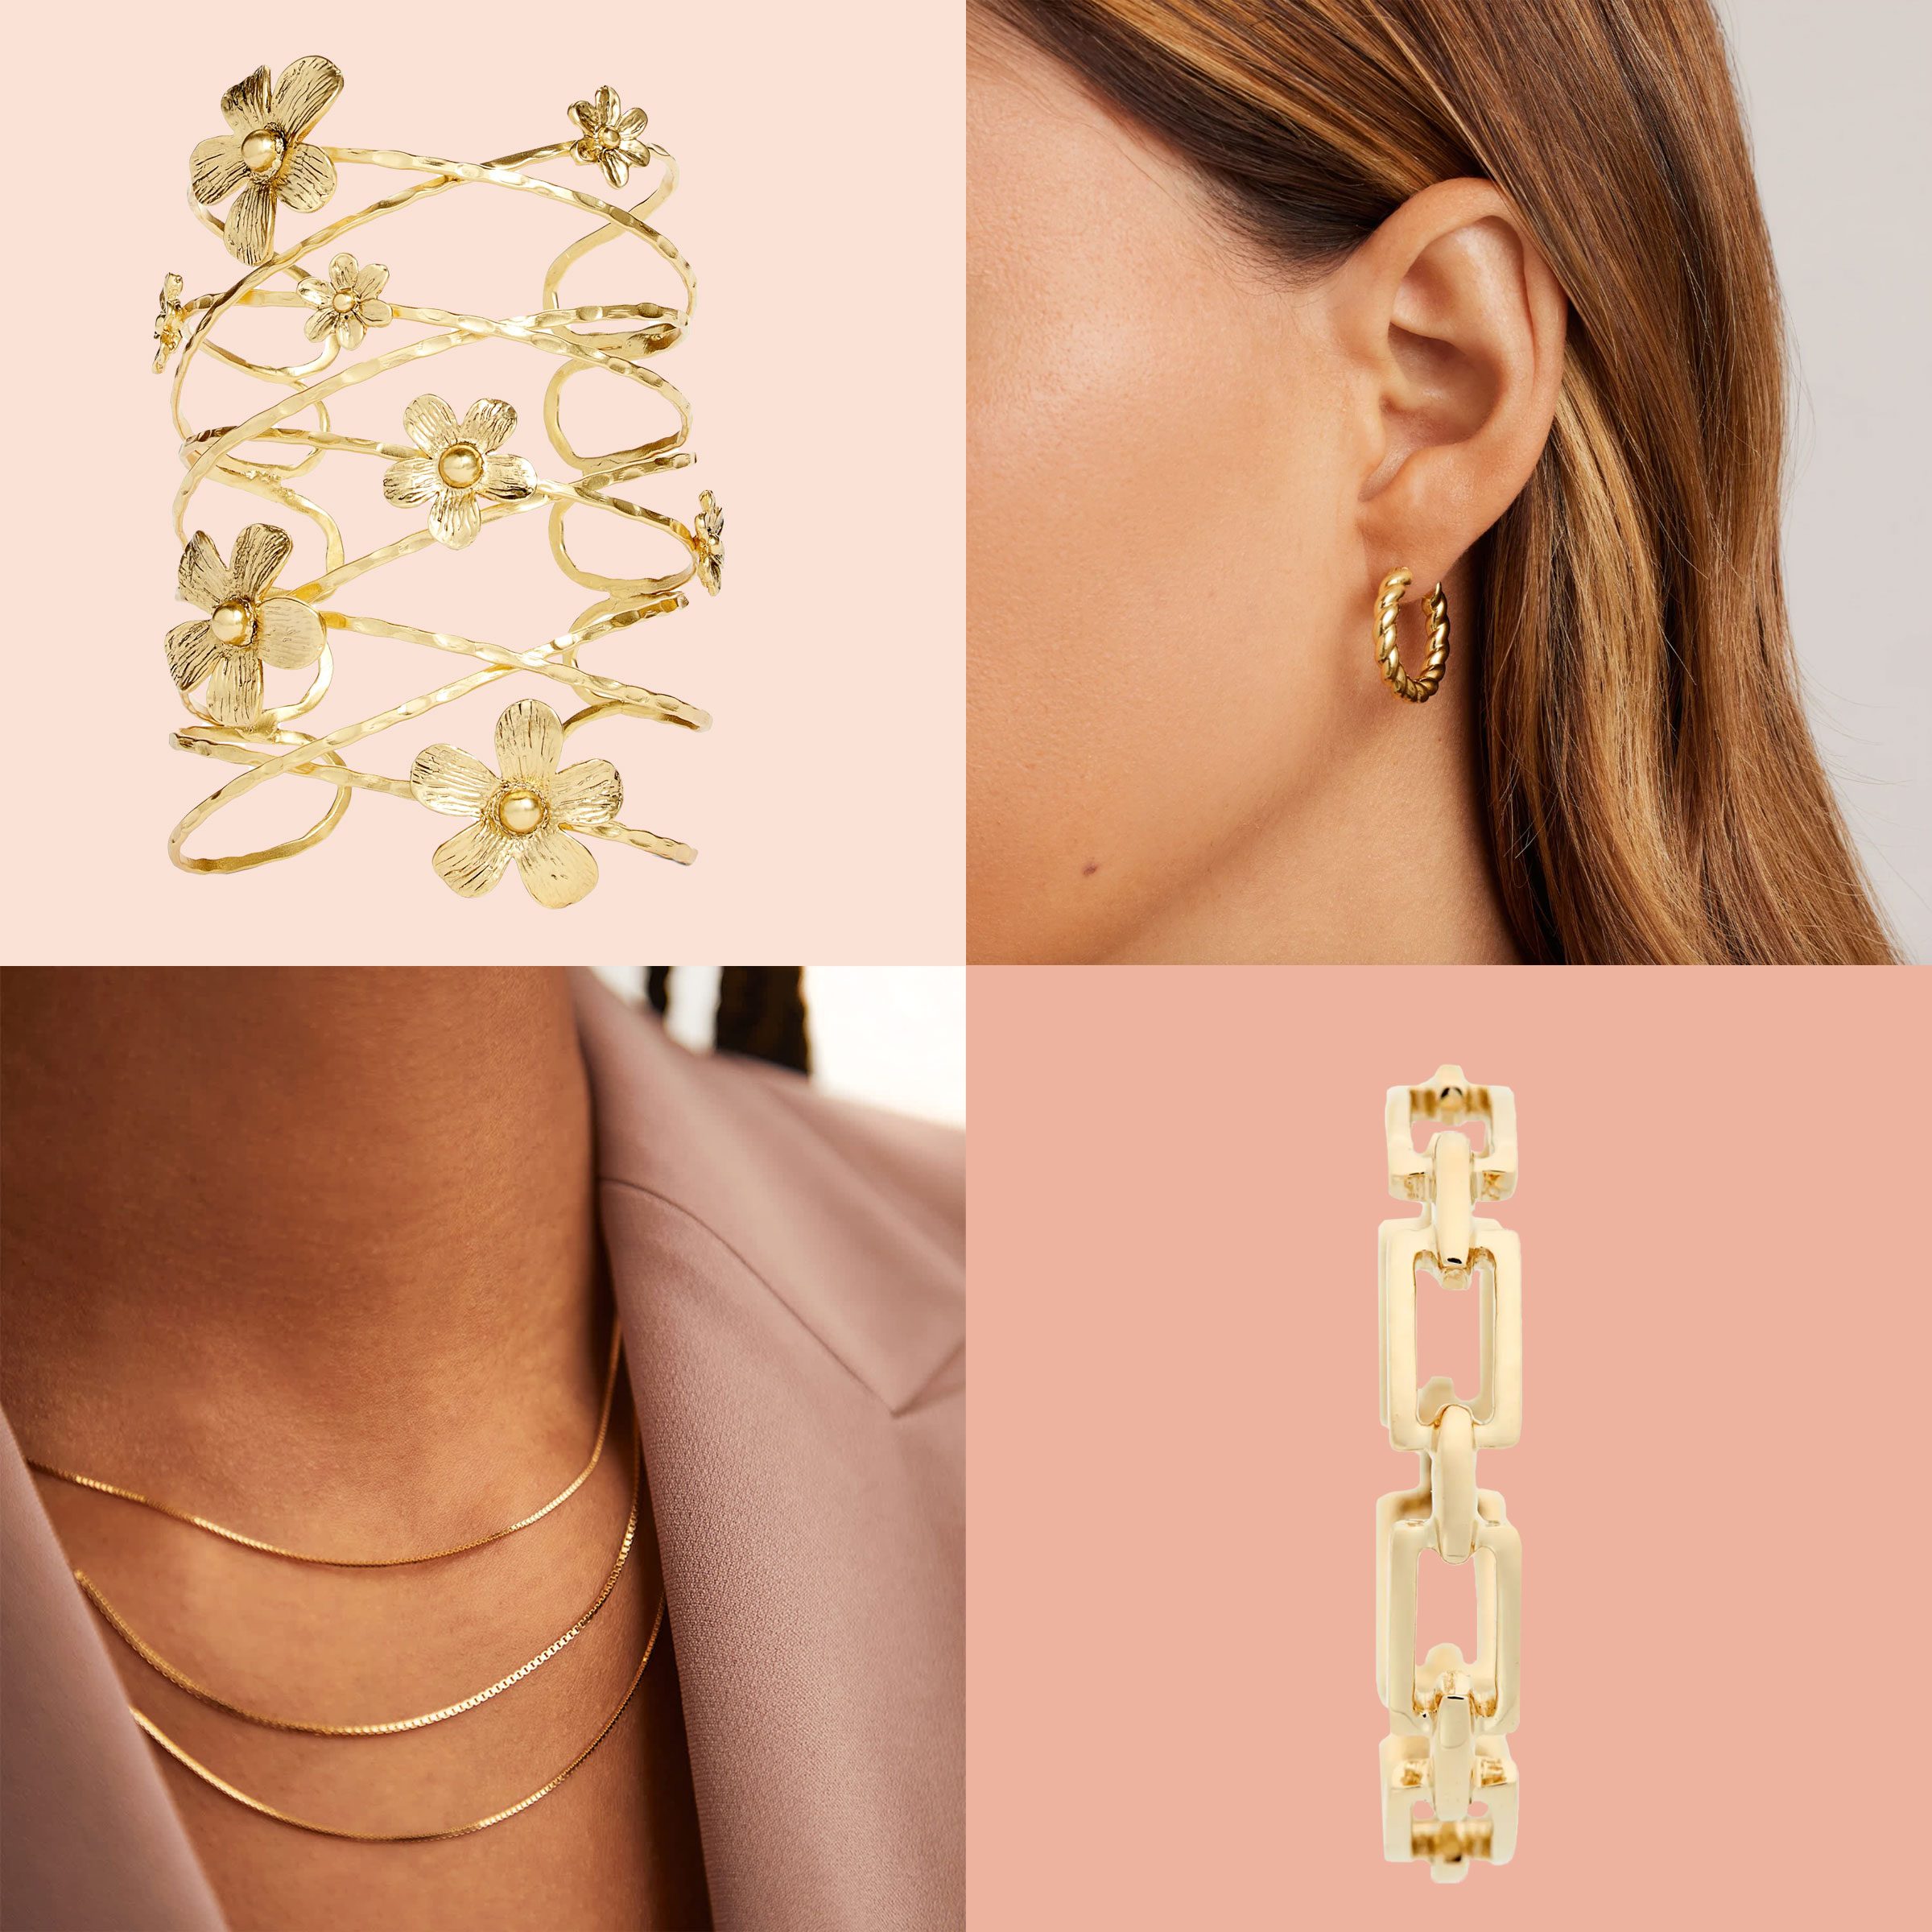 The Best Jewelry Pieces to Match Your Style in